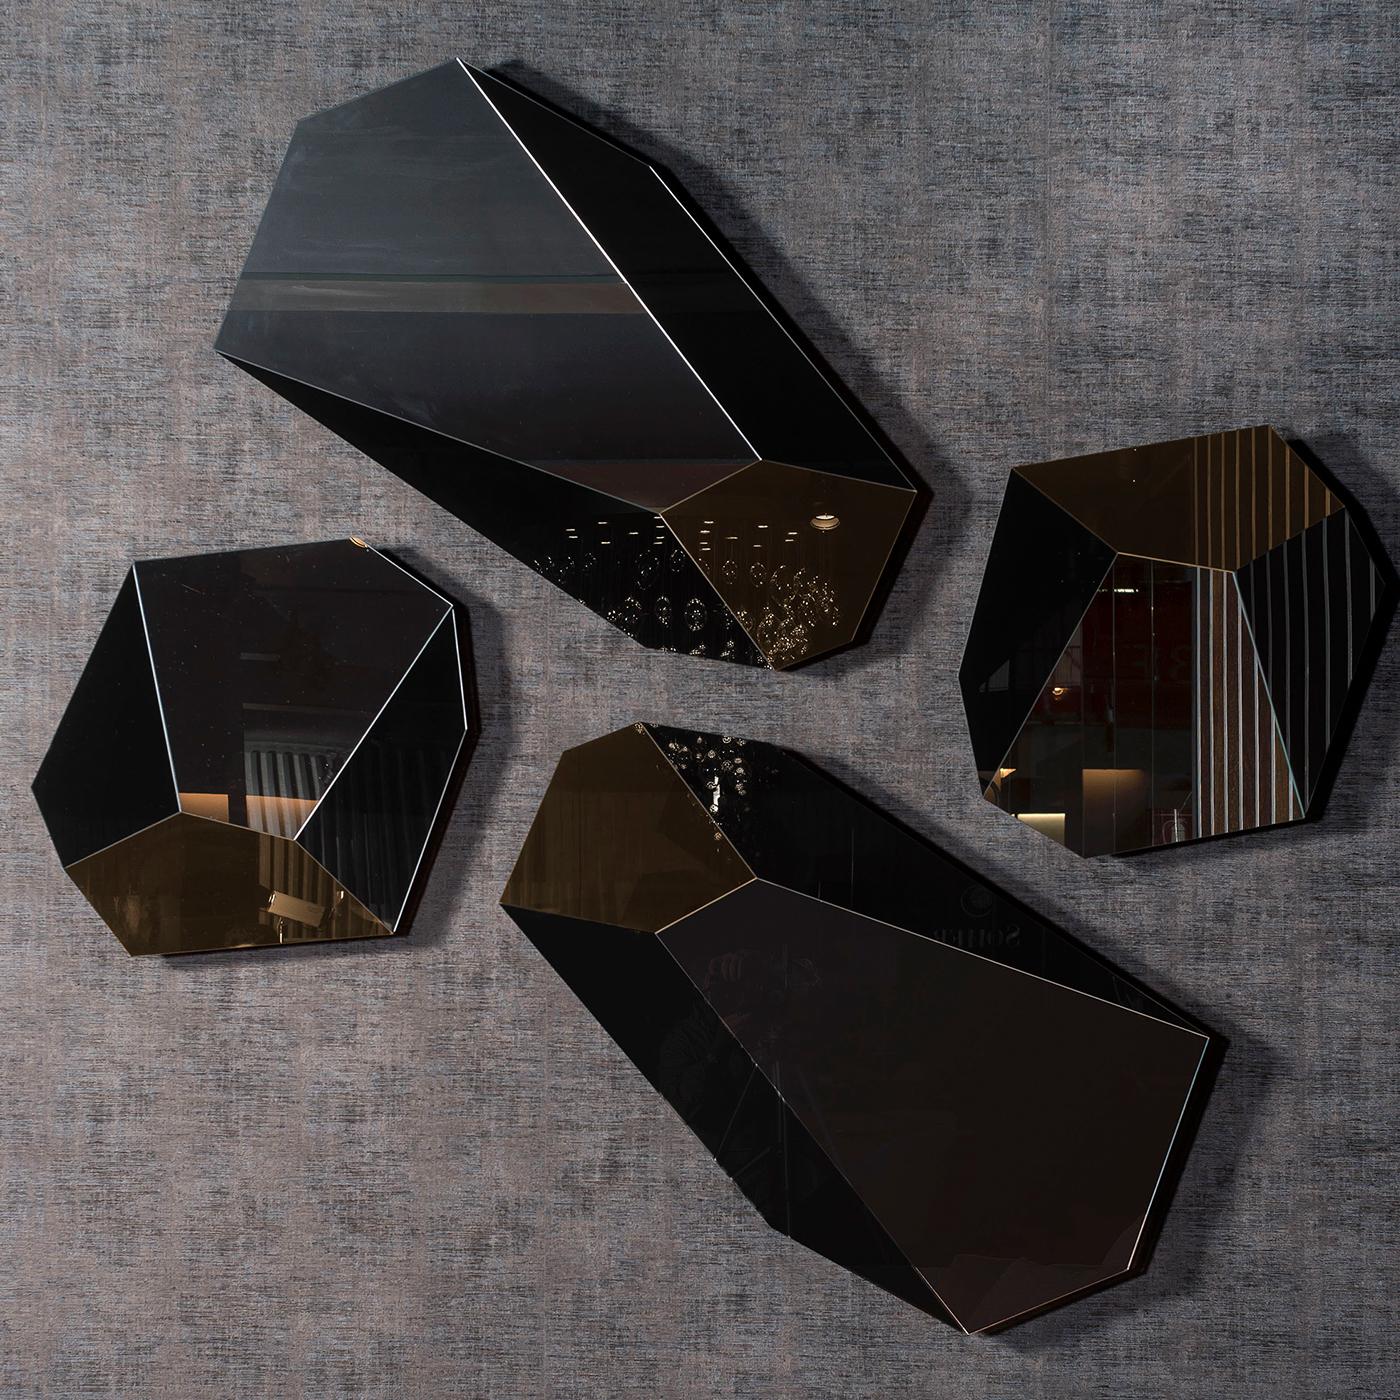 A bold and iconic accent for a contemporary living room, this extraordinary wall mirror boasts a singular interplay of geometric shapes and finishes that makes it distinctive and alluring. Ideally paired with others from the same series, it features